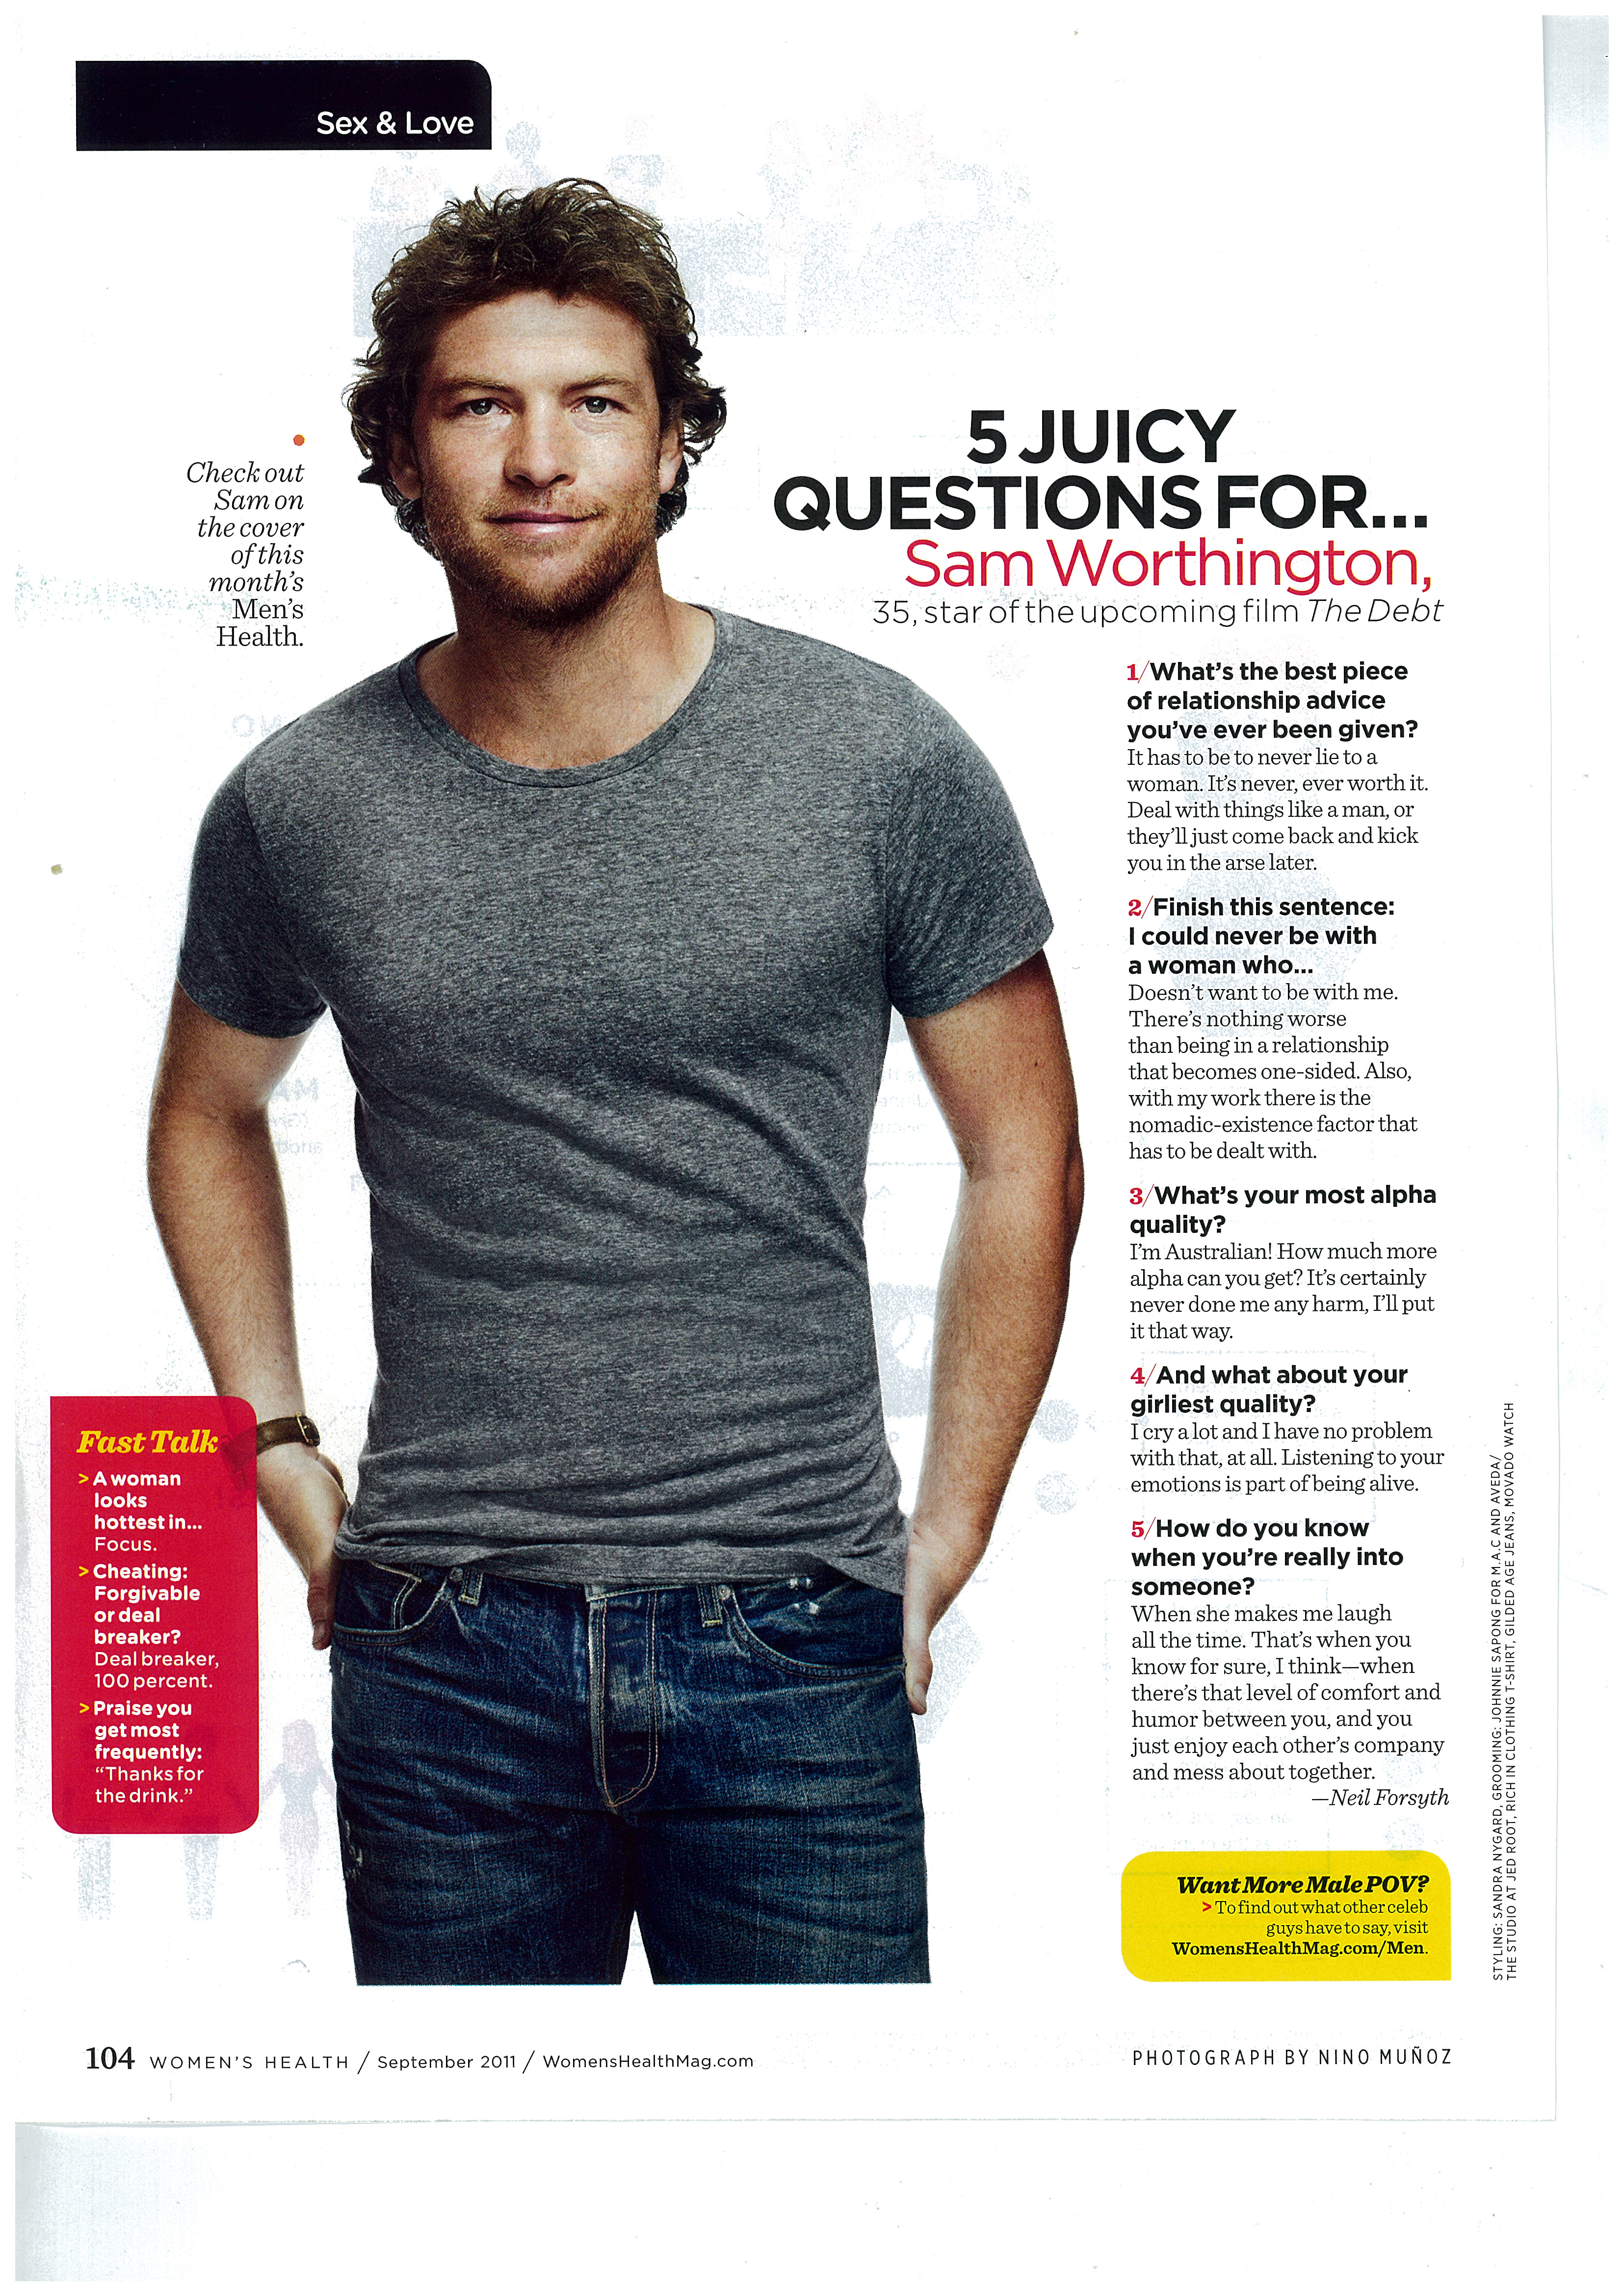 Articles All About Sam Worthington サム ワーシントンな日々